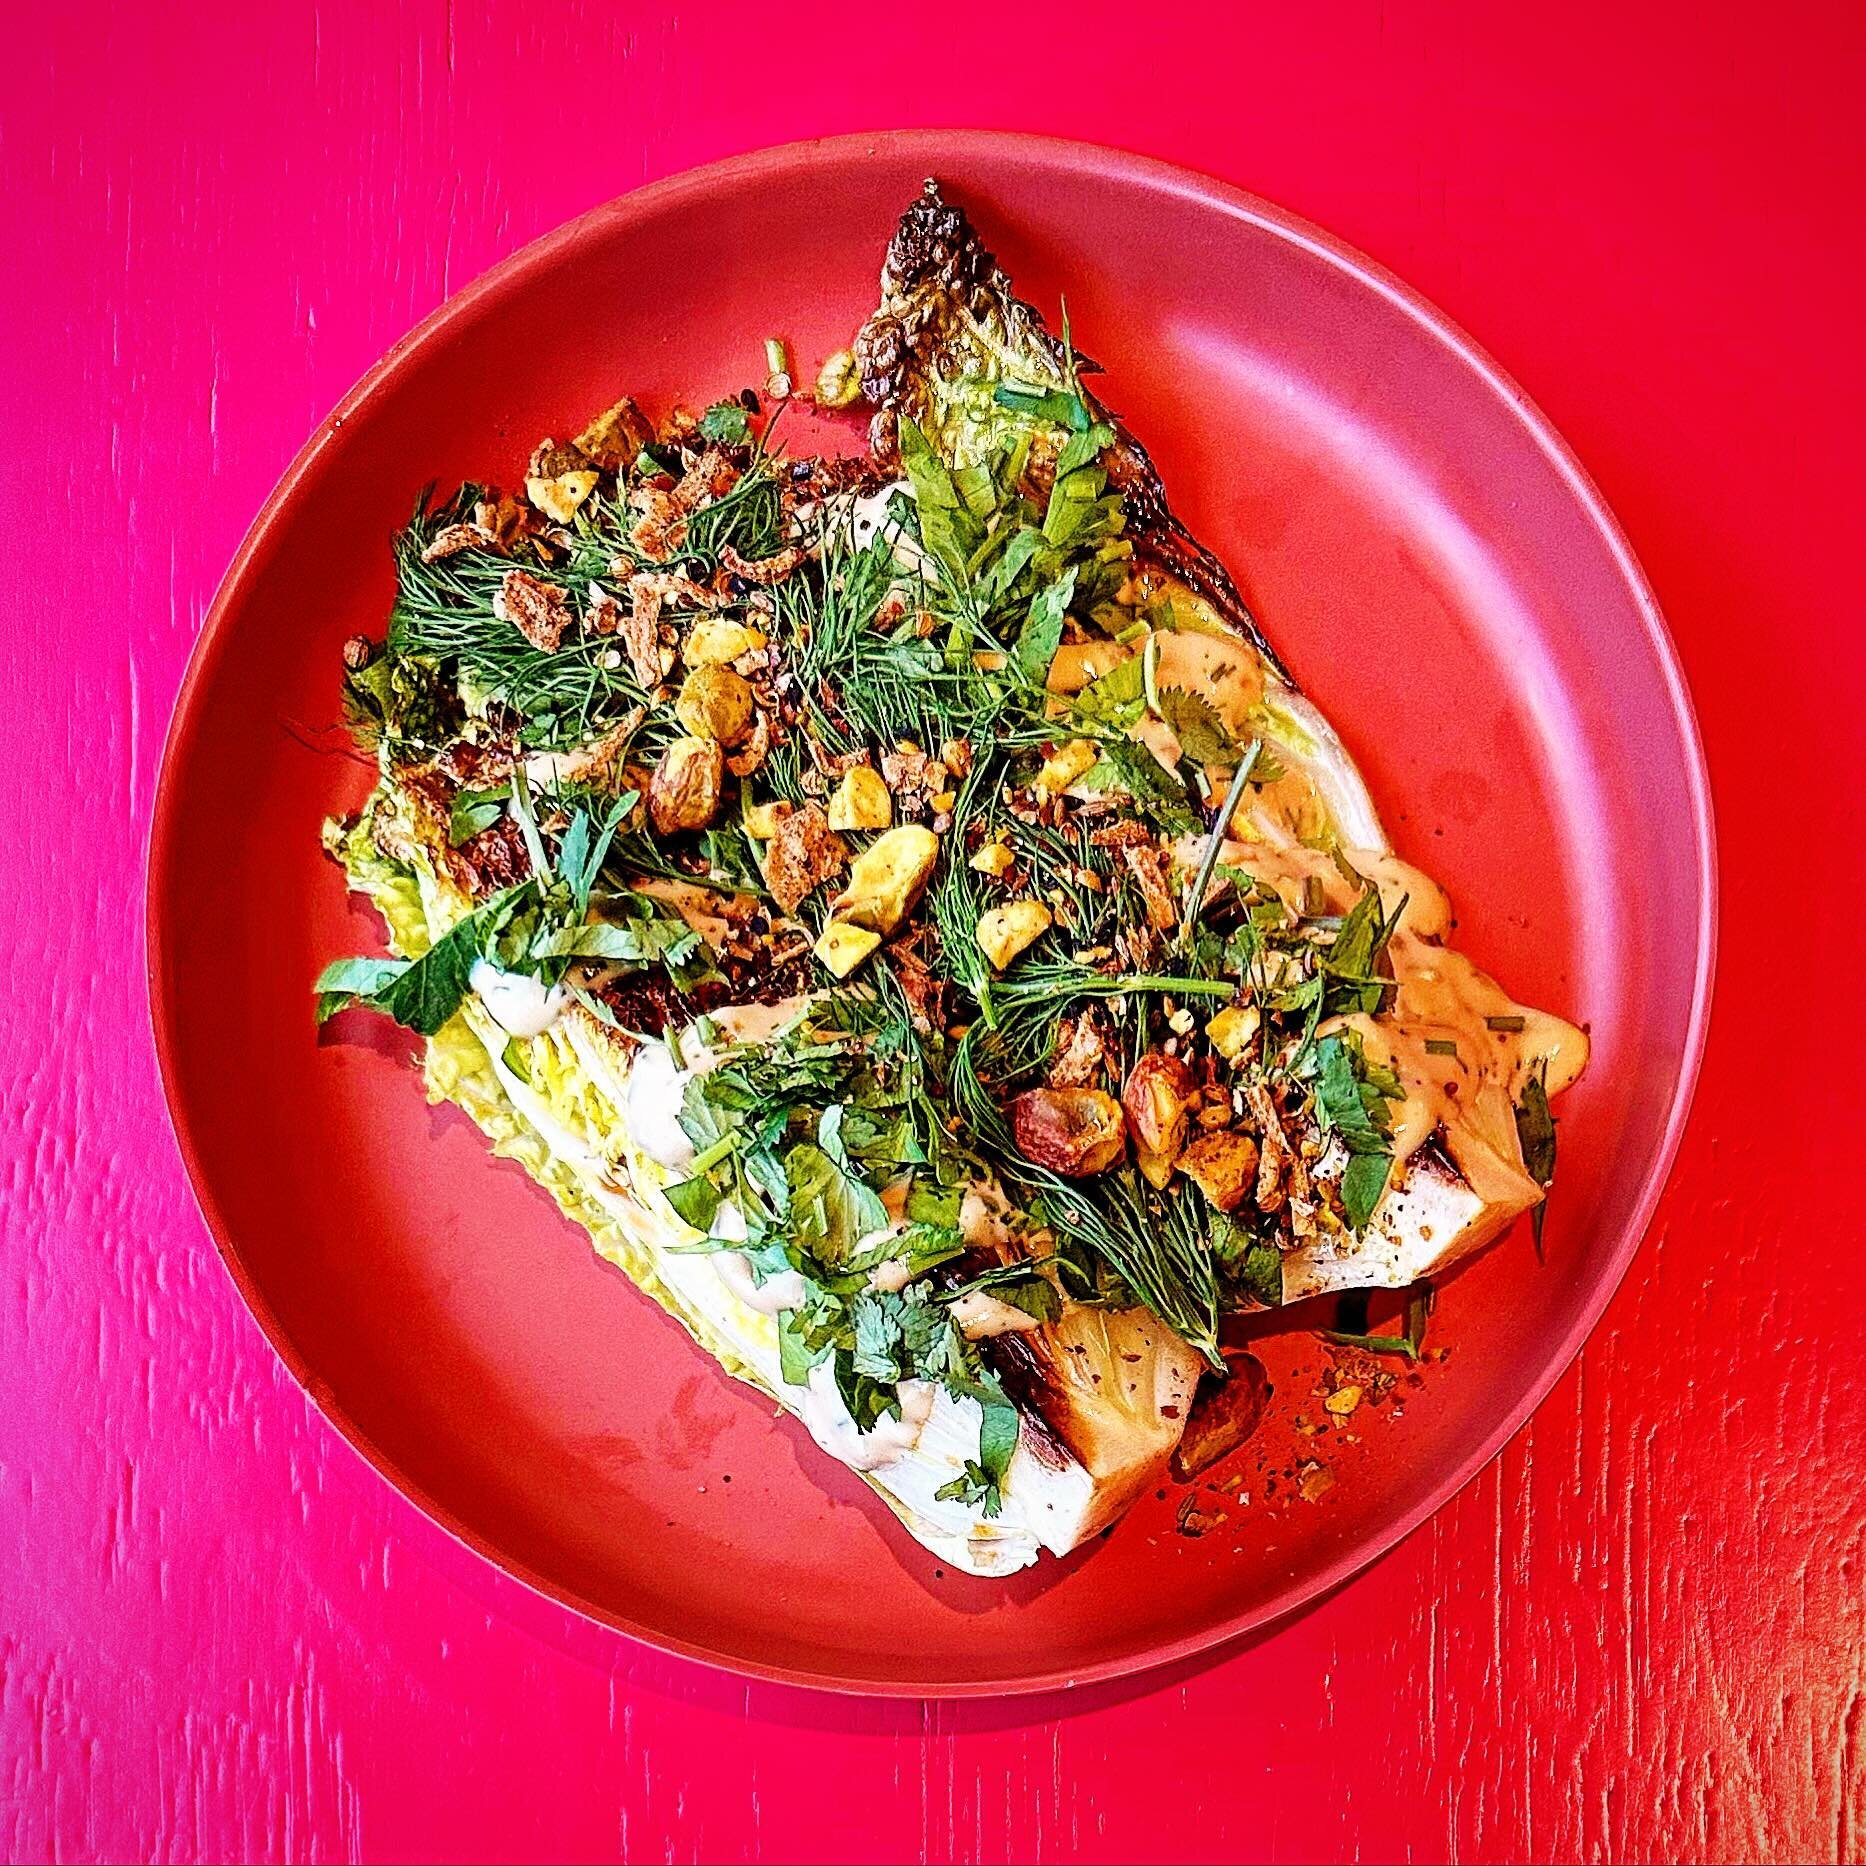 new, New, NEW! GRIDDLED CABBAGE baby napa, tahini ranch, pomegranate molasses, pistachio dukkah, herbs